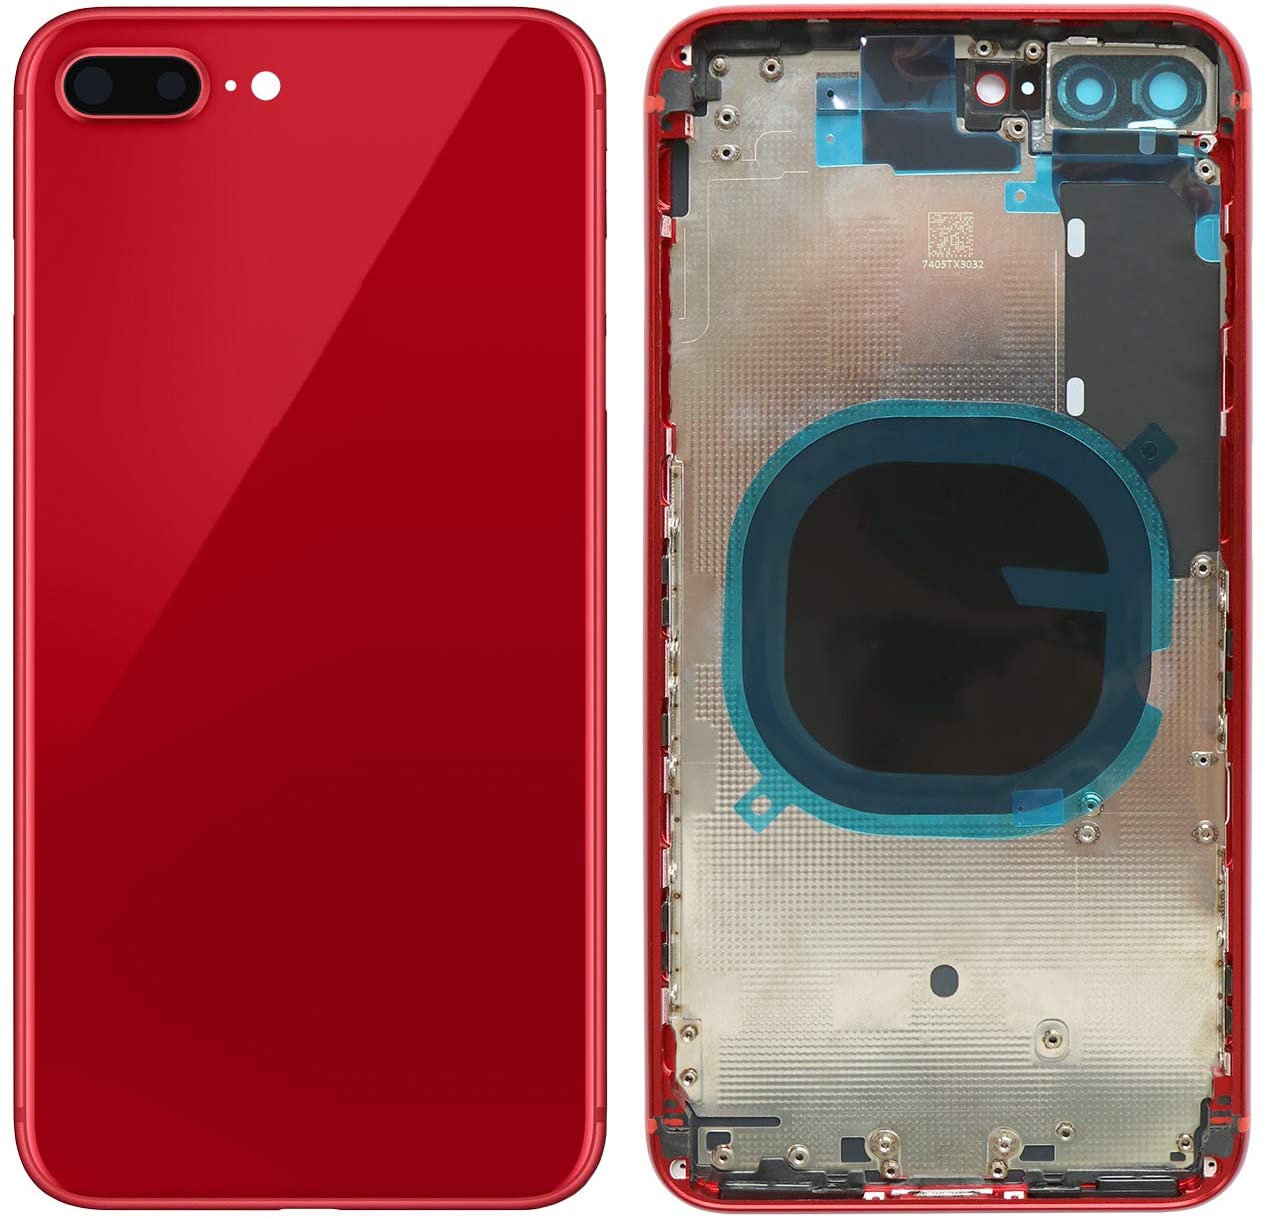 iPhone 8 Plus Back Battery Cover Housing without small parts in Red